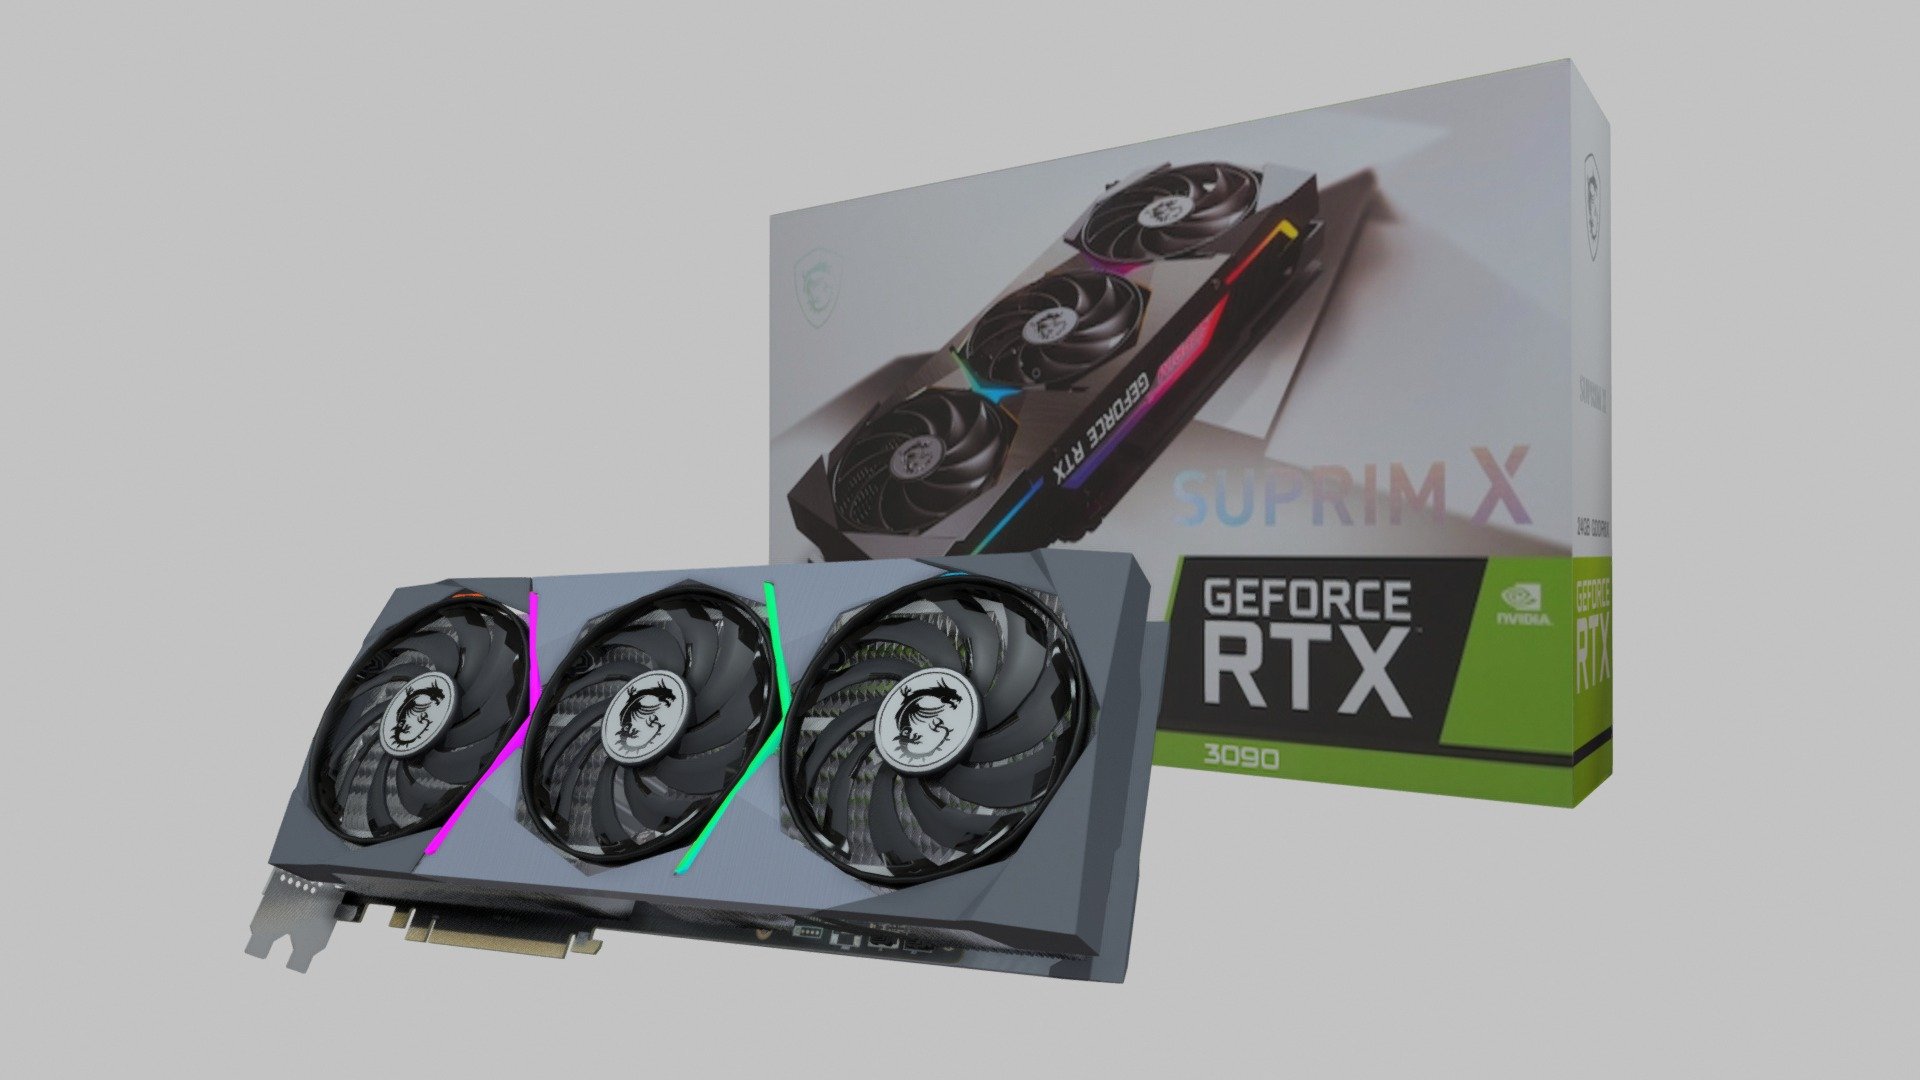 MSI GeForce RTX™ 3090 SUPRIM X • BFGPU


made on Blender


Additional file contains


RTX 3090 Original File (.blend)
.gltf/.glb
RTX 3090 Suprim X Box (.blend file)
Textures

The GeForce RTX™ 3090 Ti and 3090 are big ferocious GPUs (BFGPUs) with TITAN class performance. Powered by Ampere—NVIDIA’s 2nd gen RTX architecture—they double down on ray tracing and AI performance with enhanced Ray Tracing Cores, Tensor Cores, and new streaming multiprocessors. Plus, they feature a staggering 24 GB of G6X memory, all to deliver the ultimate experience for gamers and creators.


My Socials



My Discord Server | https://discord.gg/G8AvAkvcsr
My Instagram | https://www.instagram.com/meu9mm98/
My Twitch | https://www.twitch.tv/meu9mm98

? If you have any questions, contact me on discord.

! Do not repost my model on another site without my authorization.


Version History

V2.0
 - MSI GeForce RTX™ 3090 SUPRIM X 24G - Buy Royalty Free 3D model by M E U (@meu9MM98) 3d model